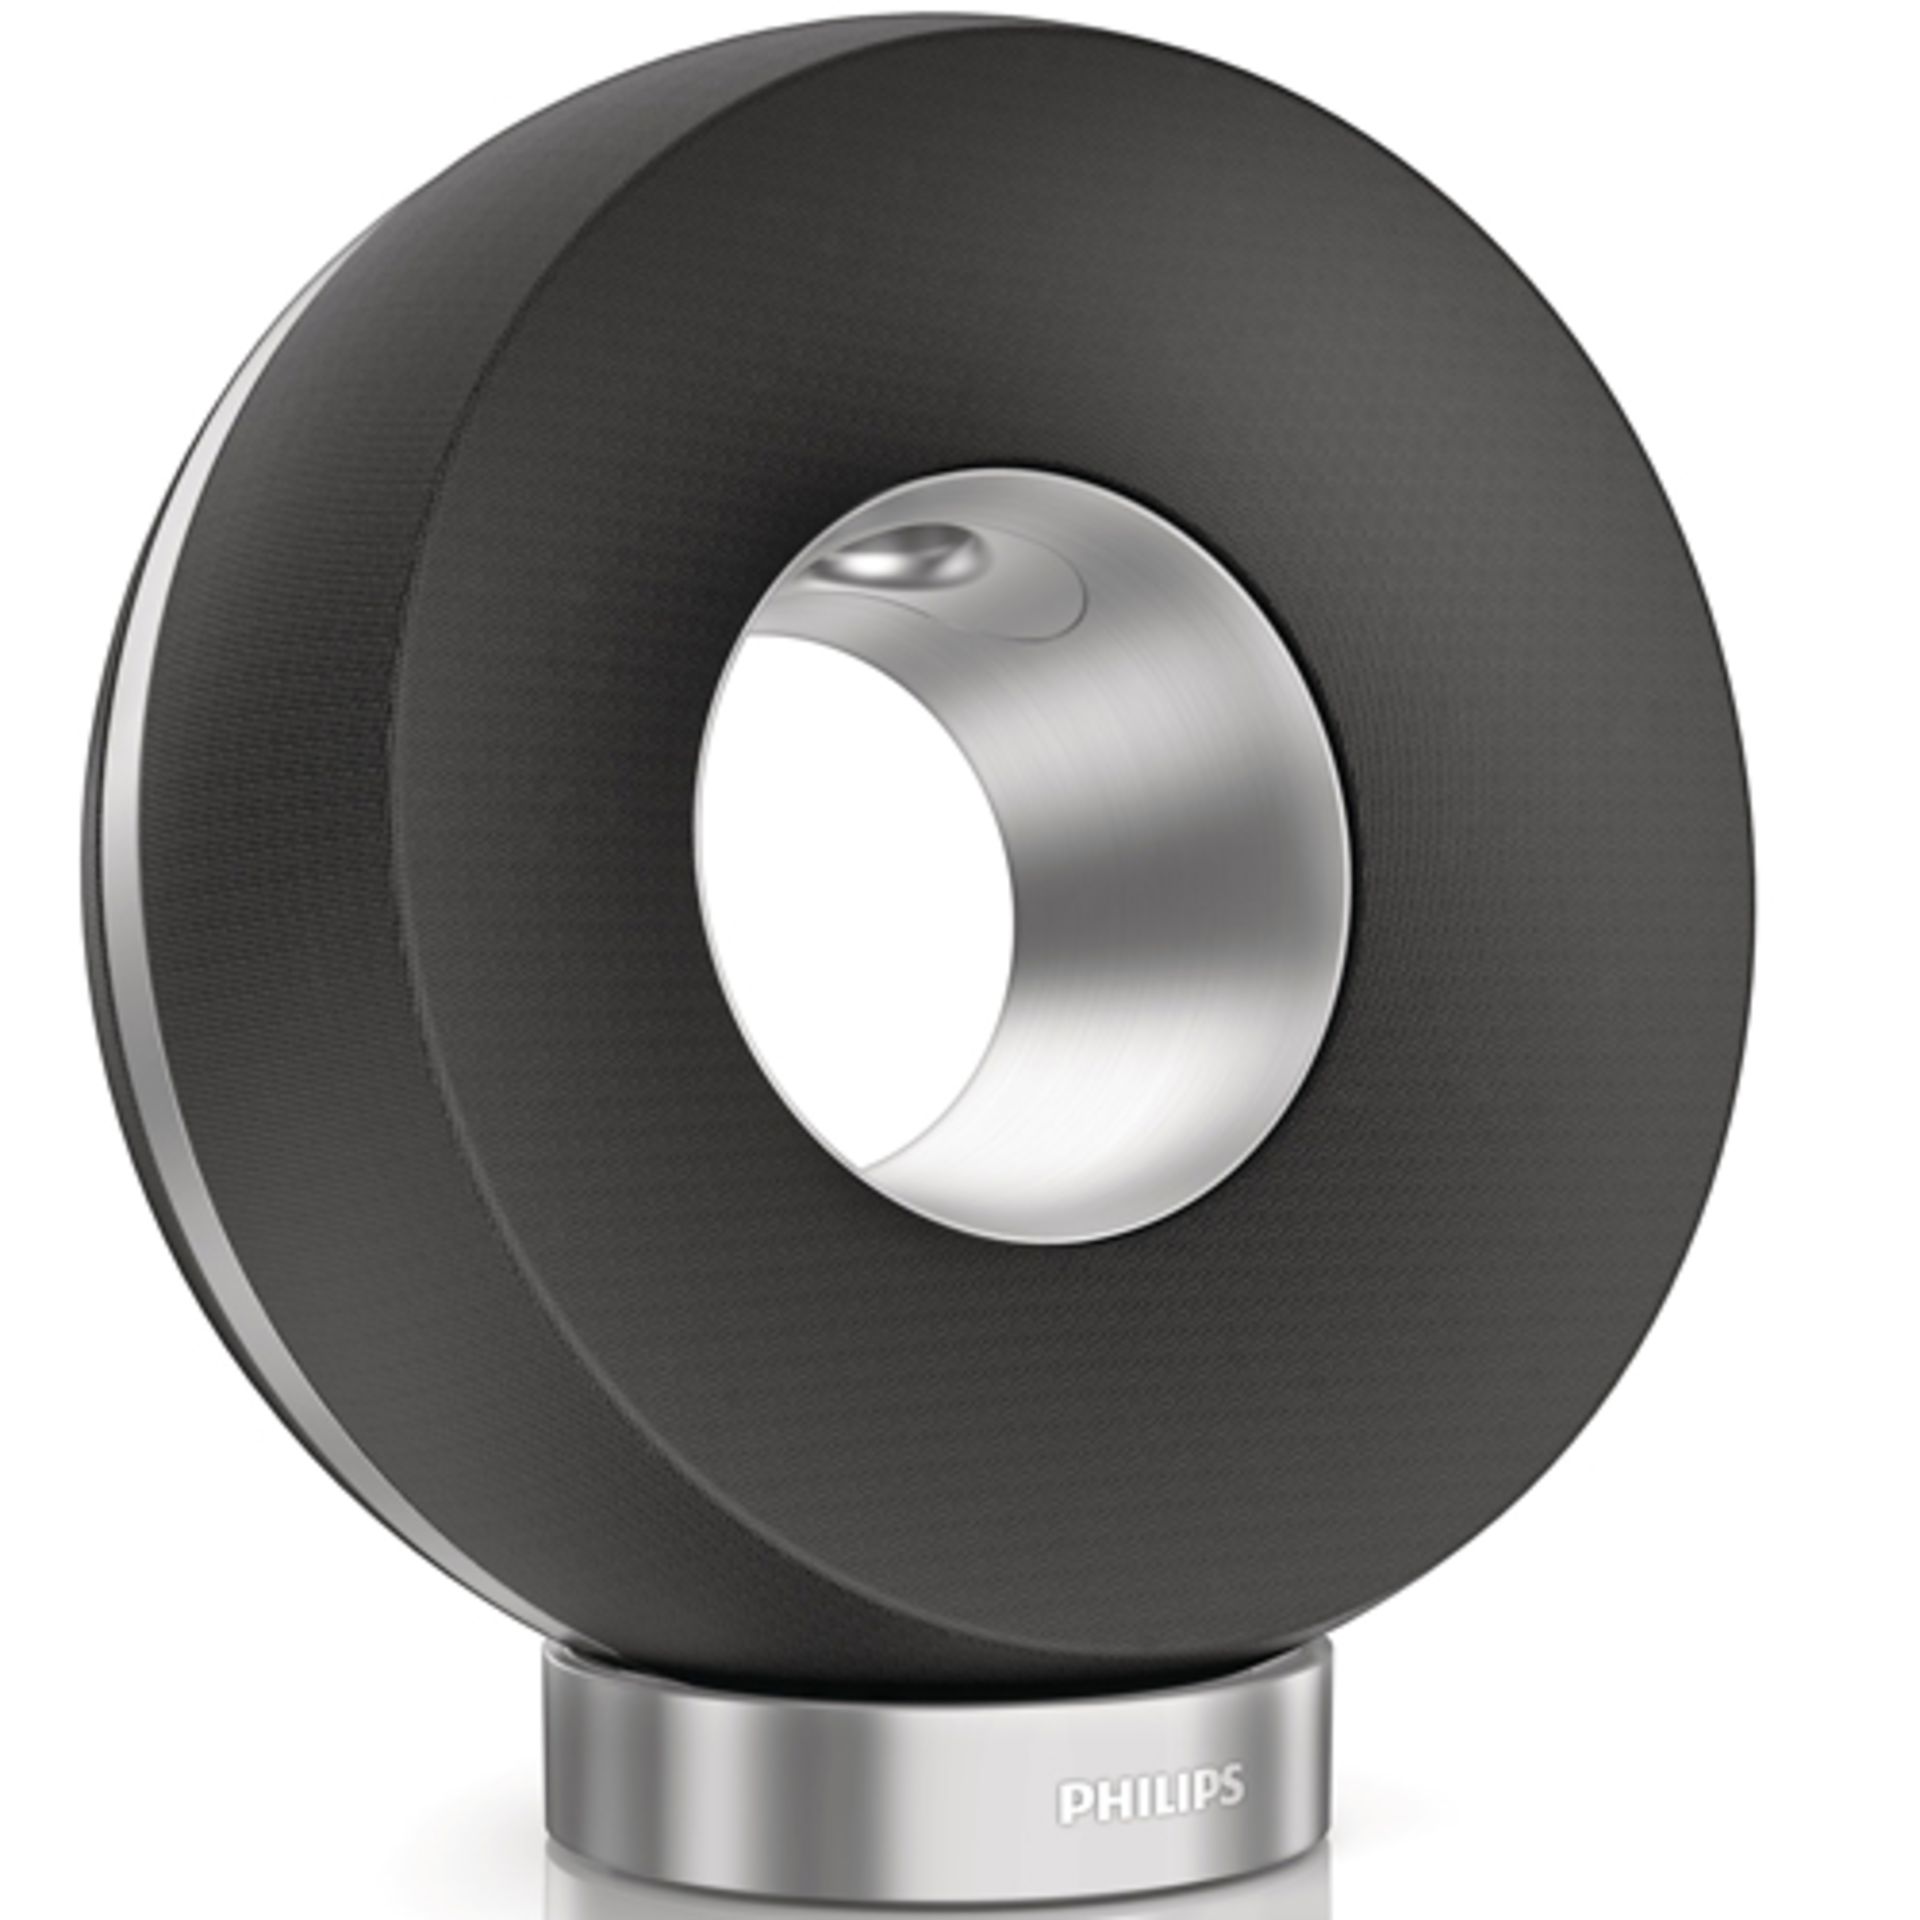 V Brand New Philips DS3880/10 Fidelio Soundsphere with Airplay - Aux Input - USB For Charging and